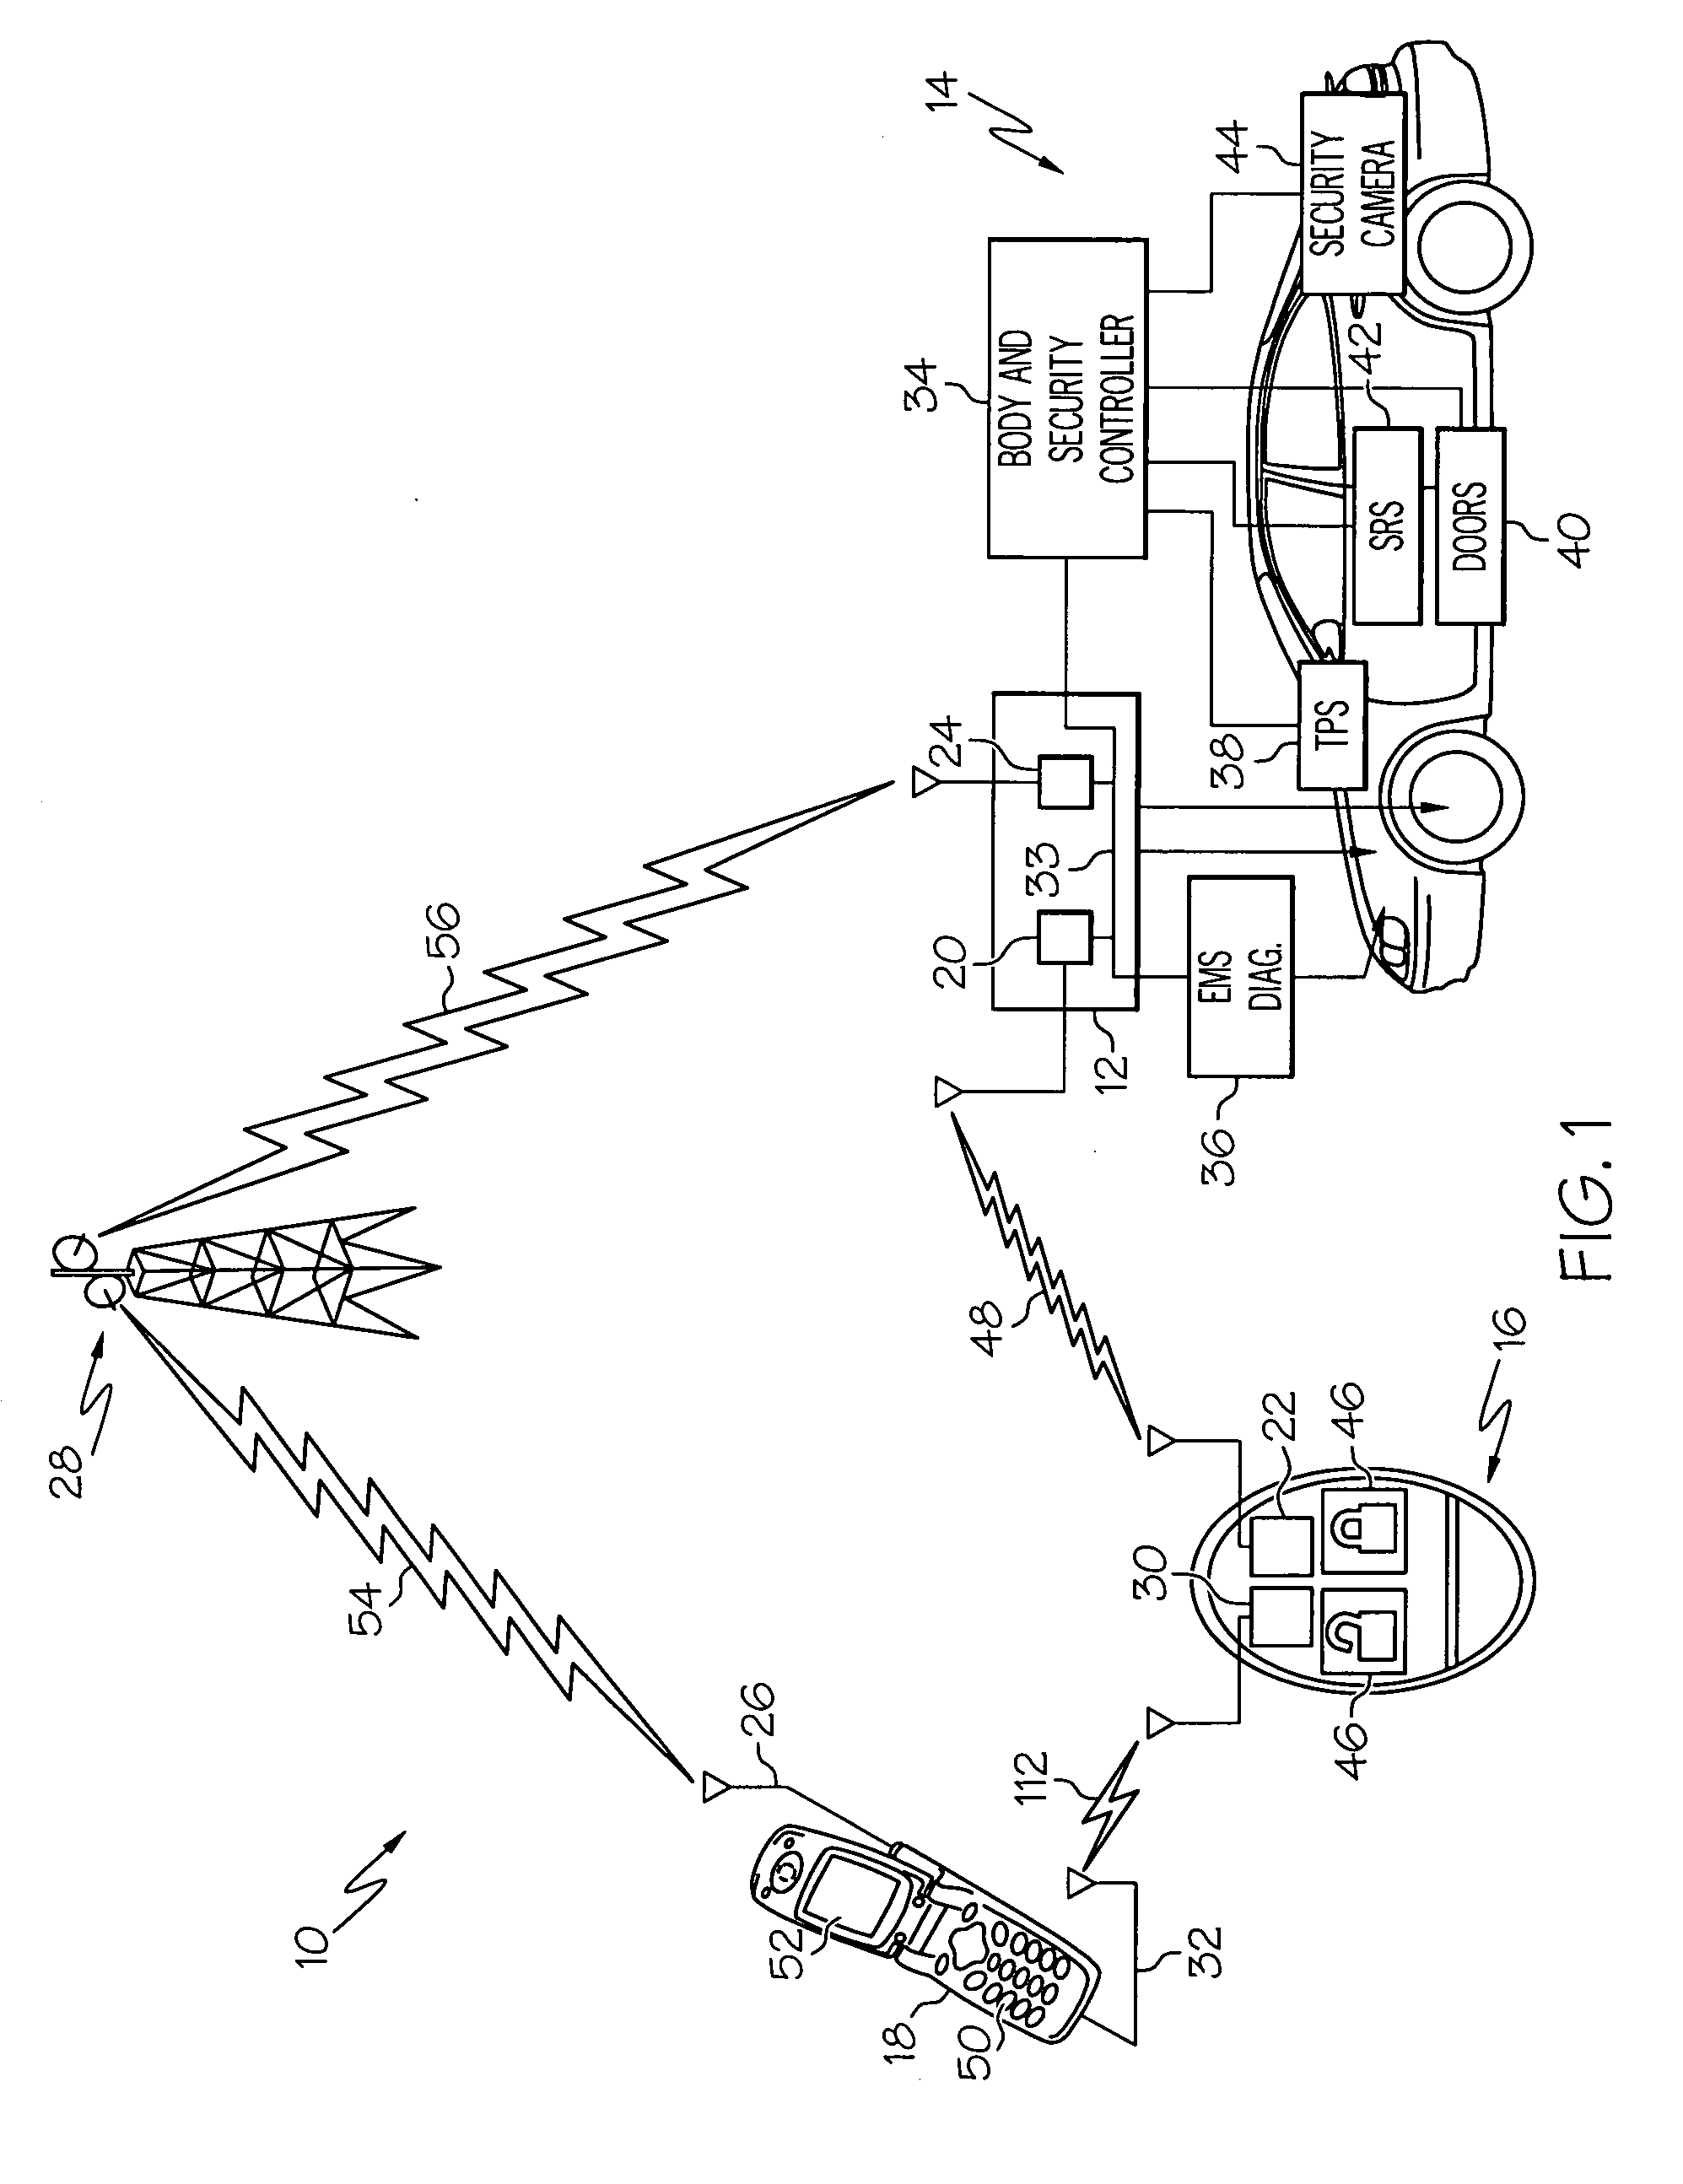 Fault tolerant vehicle communication and control apparatus